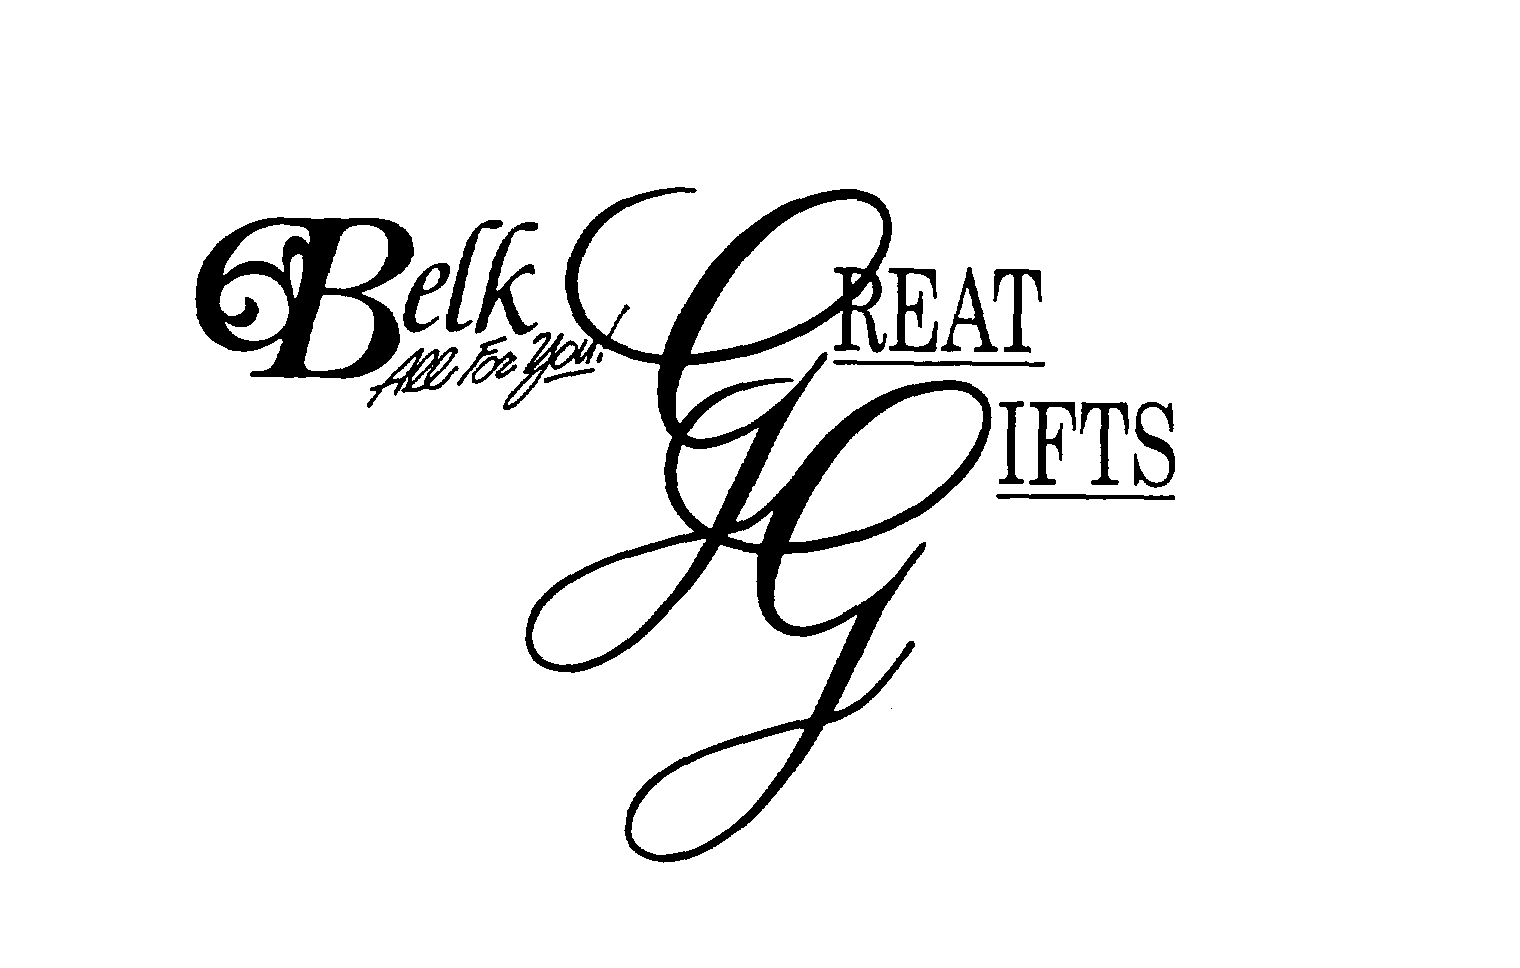  BELK ALL FOR YOU! GREAT GIFTS